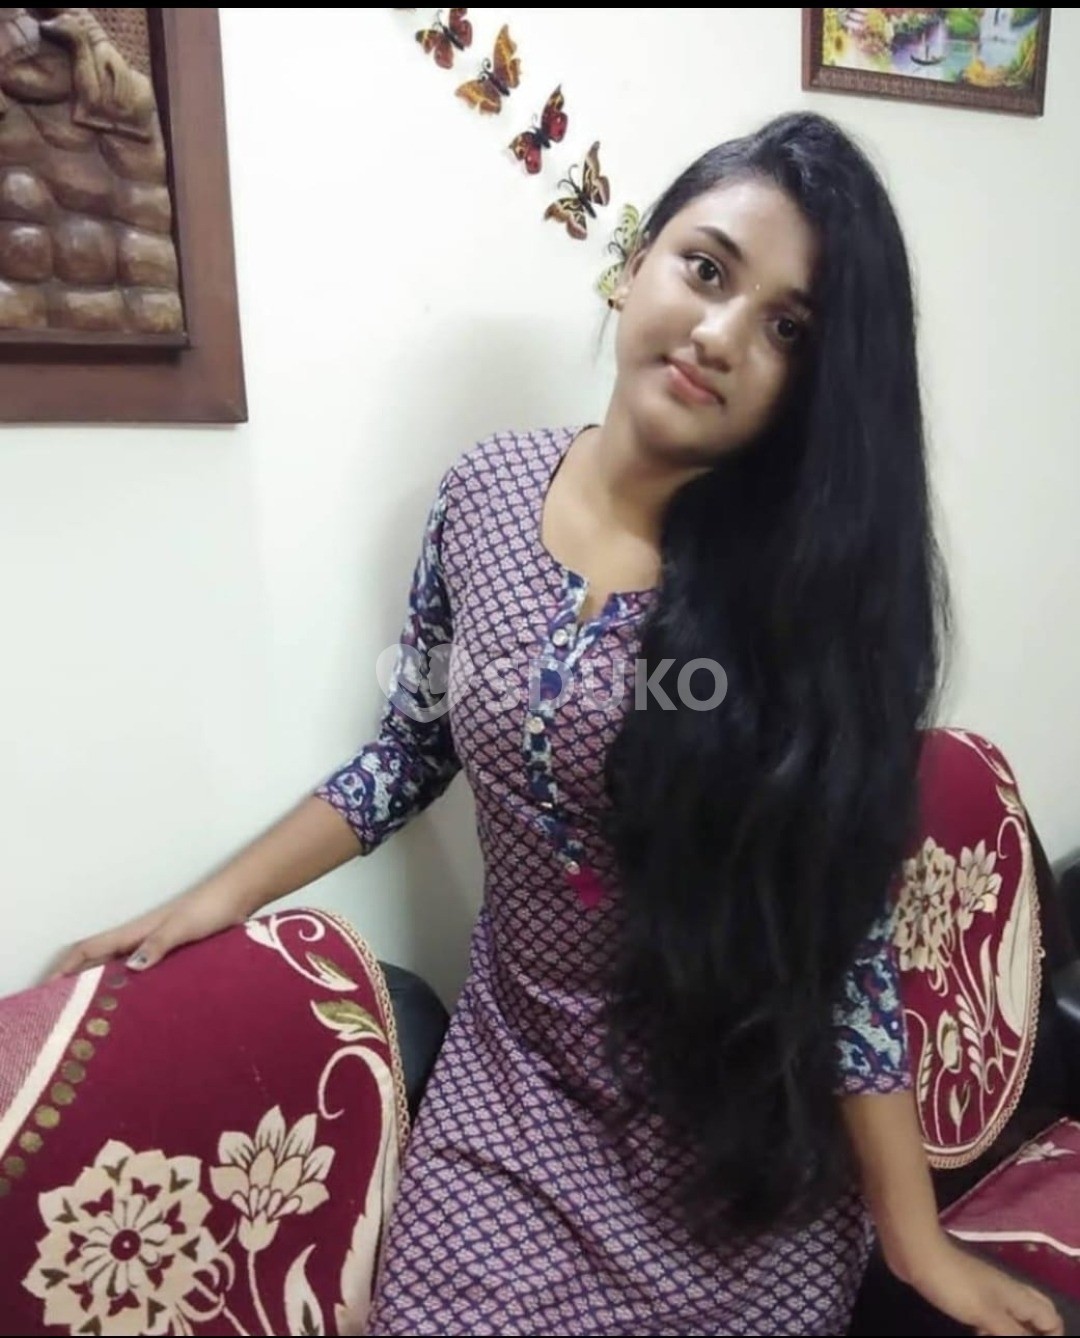 Kottayam 💙,,,MY SELF DIVYA UNLIMITED SEX CUTE BEST SERVICE AND 24 HR AVAILABLE.